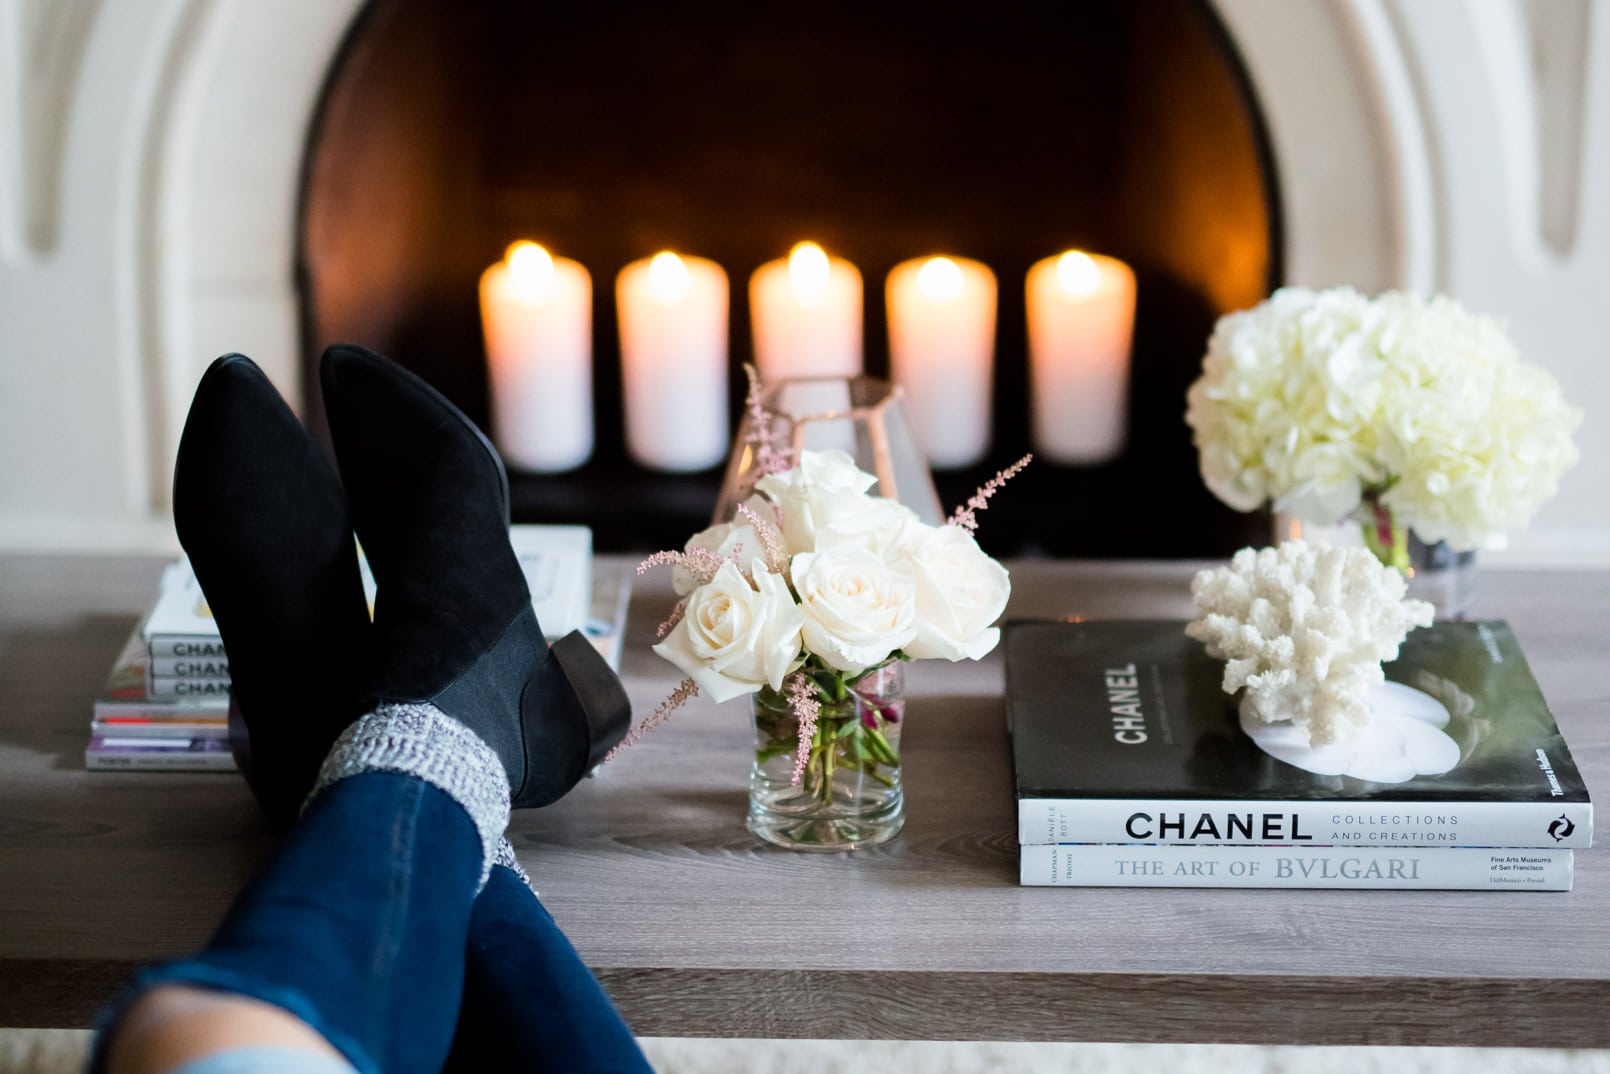 The Girl From Panama Home, Fireplace, Candles, Black Booties, Chanel table book, flowers